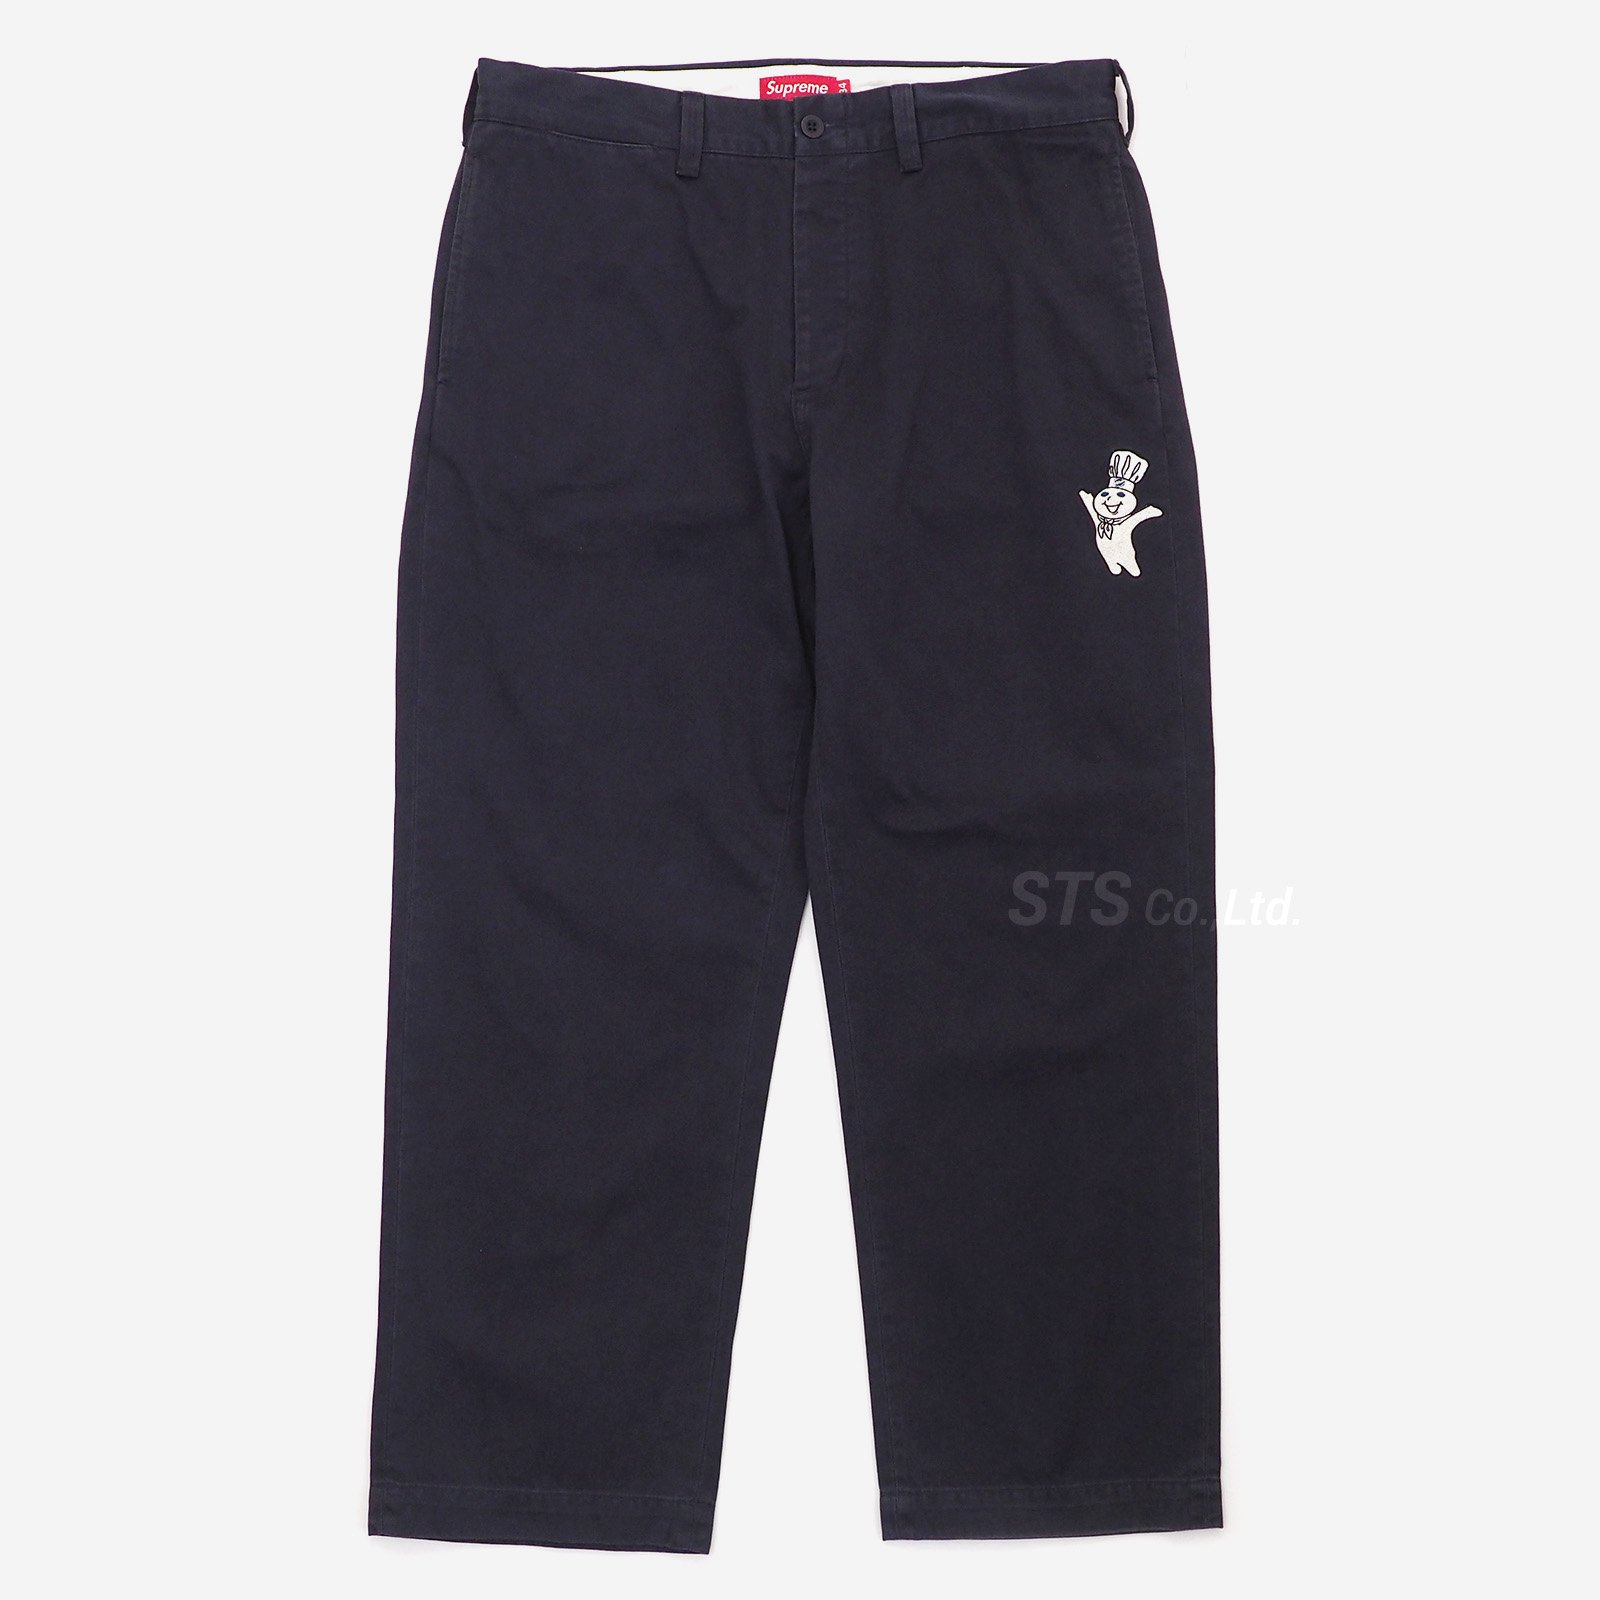 Supreme/ Doughboy Chino Pant 30in.